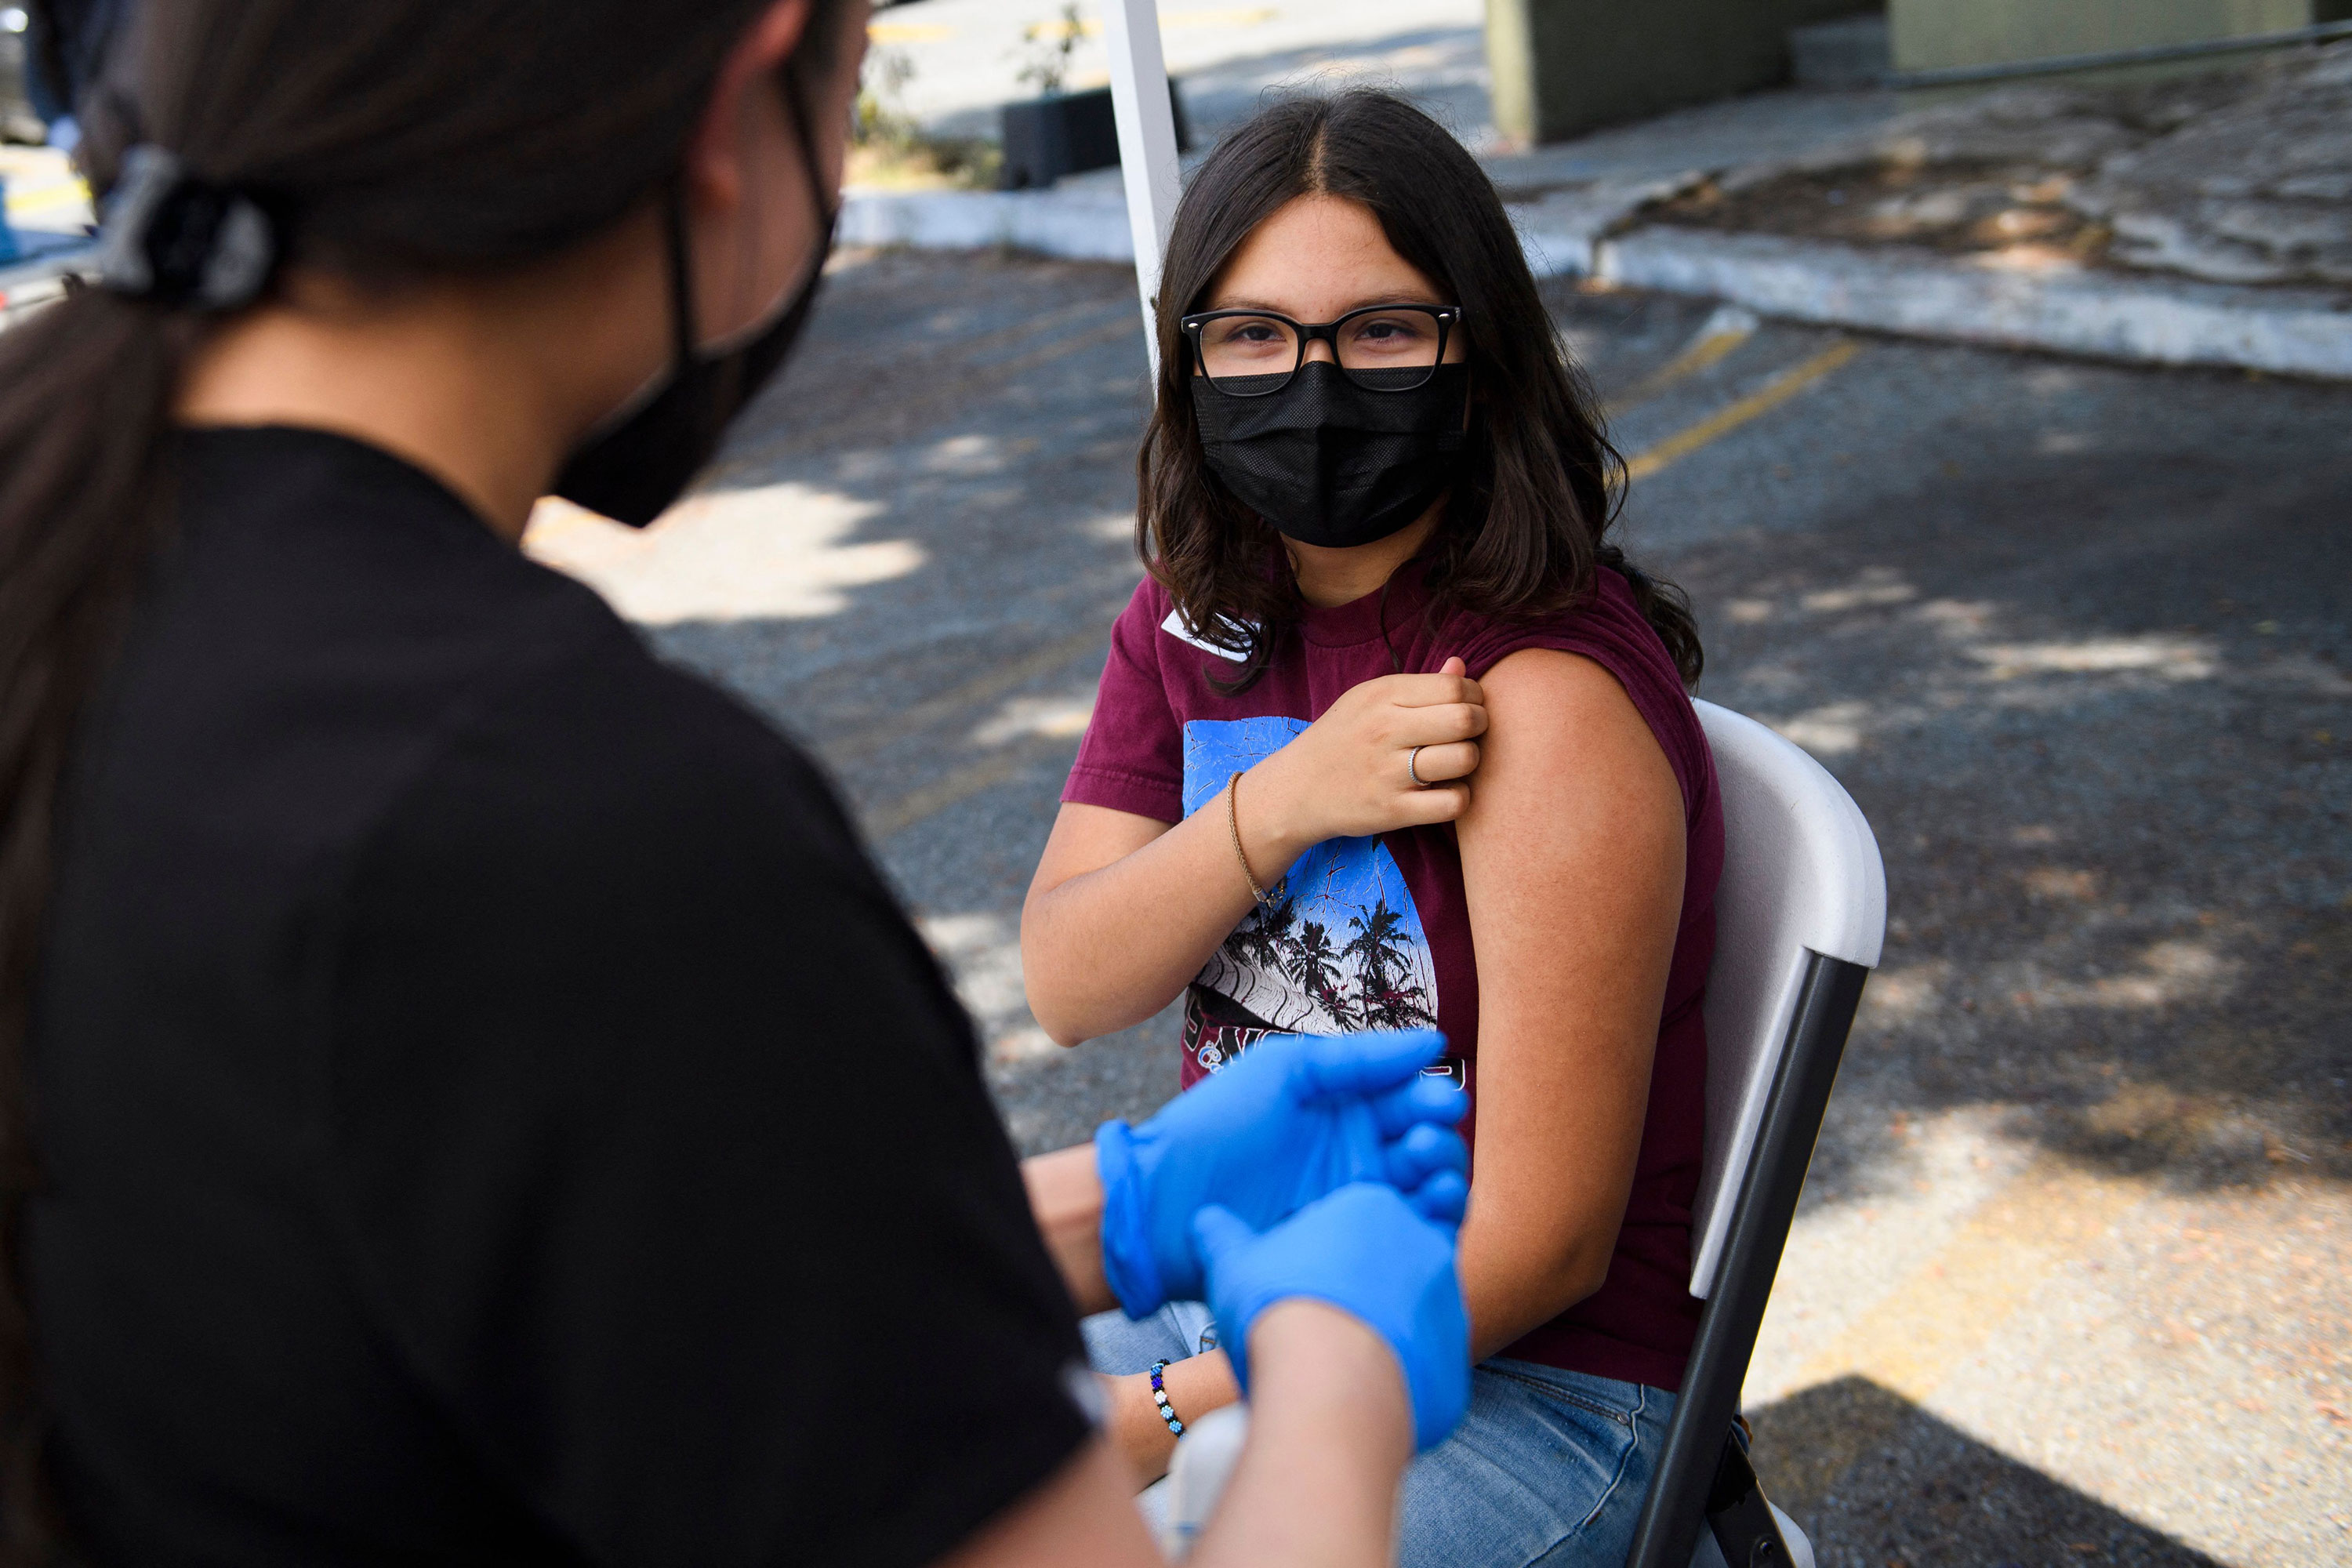 A 16-year-old rolls up their sleeve to receive a first dose of the Pfizer Covid-19 vaccine at a mobile vaccination clinic in Los Angeles in May.